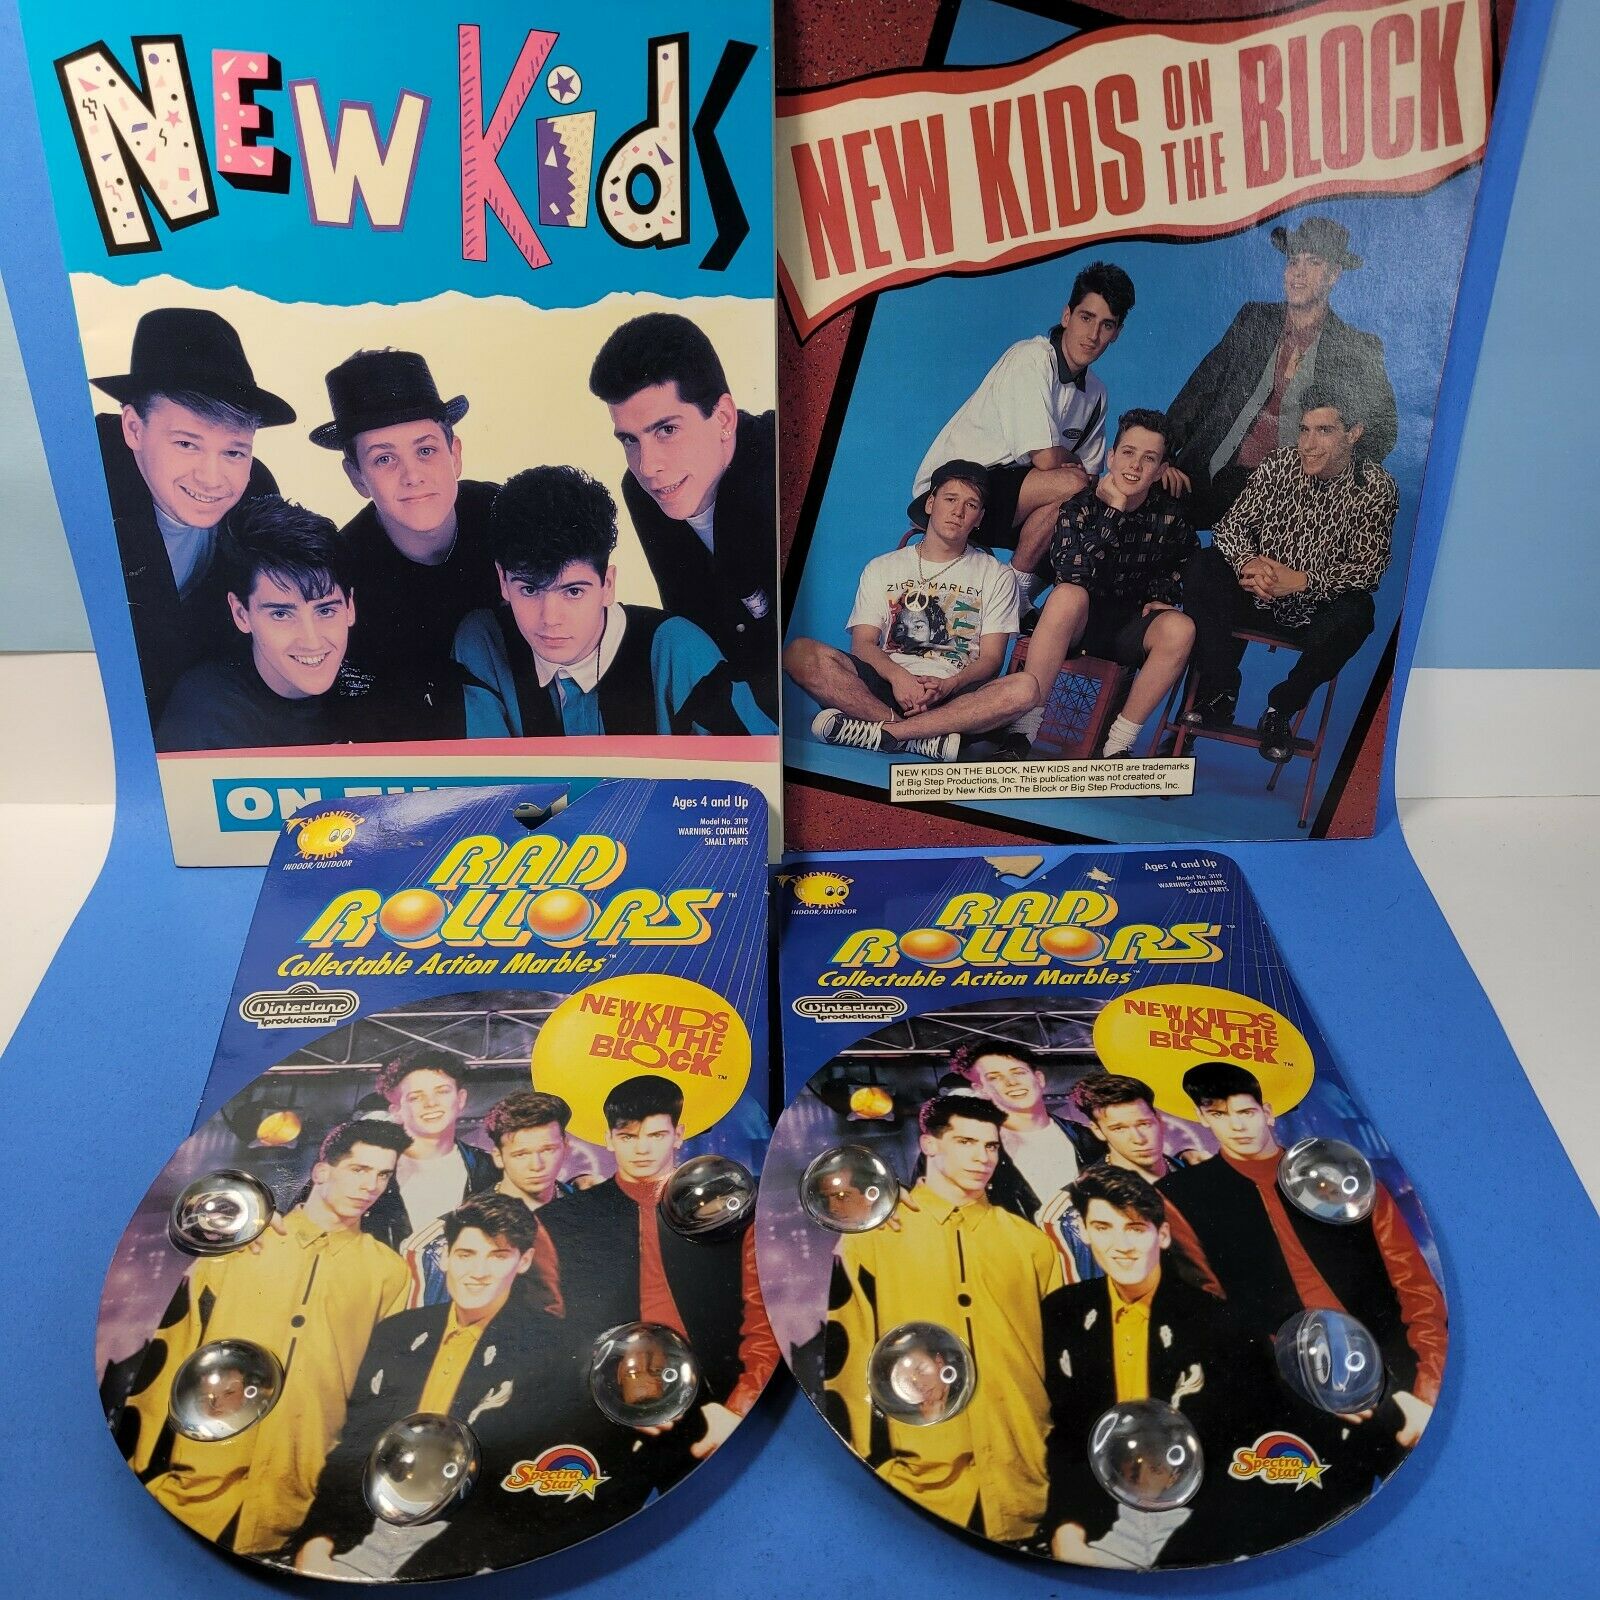 New Kids On The Block Collection 2 sets Rad Rollers Photo Book Poster NKOTB 1990